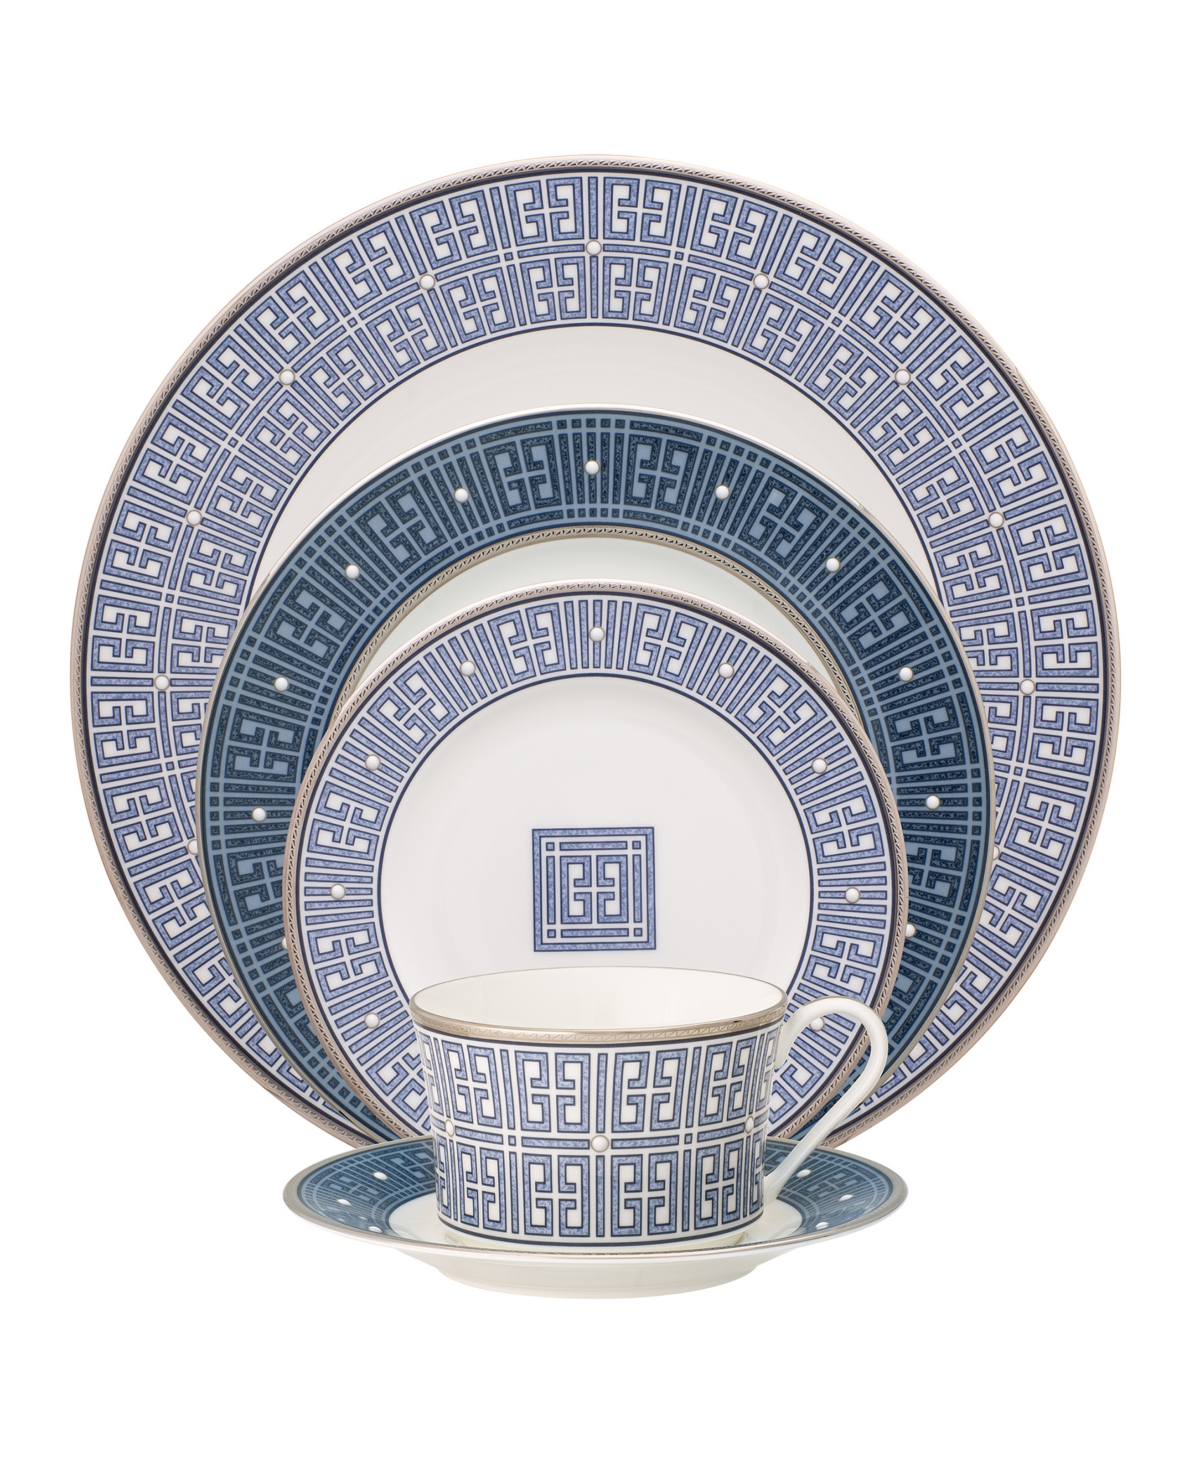 Noritake Infinity 5 Piece Place Setting In Blue